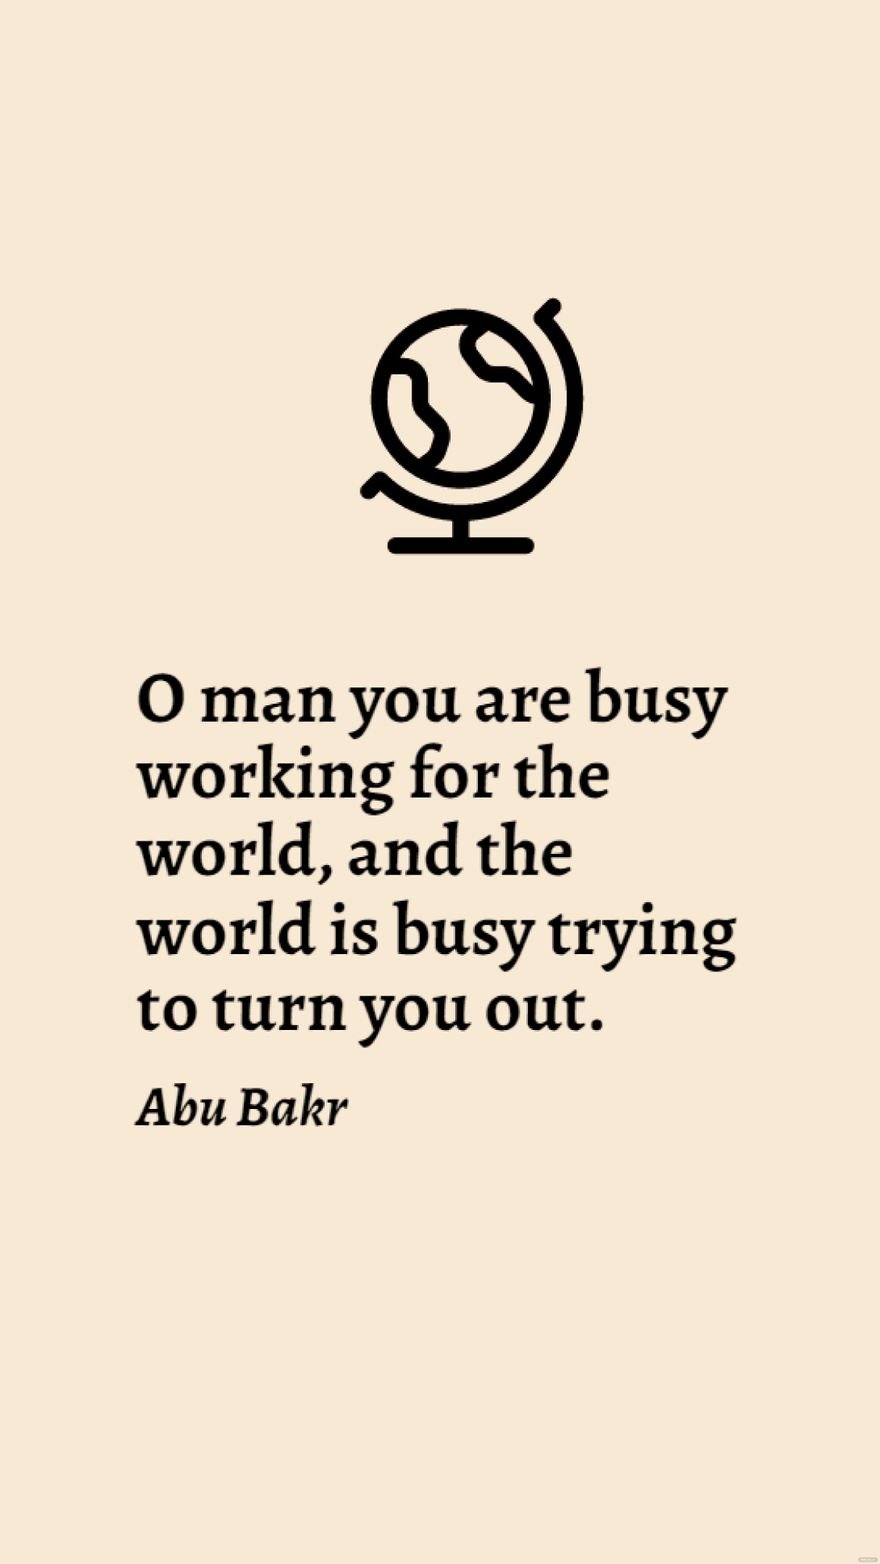 Abu Bakr - O man you are busy working for the world, and the world is busy trying to turn you out.